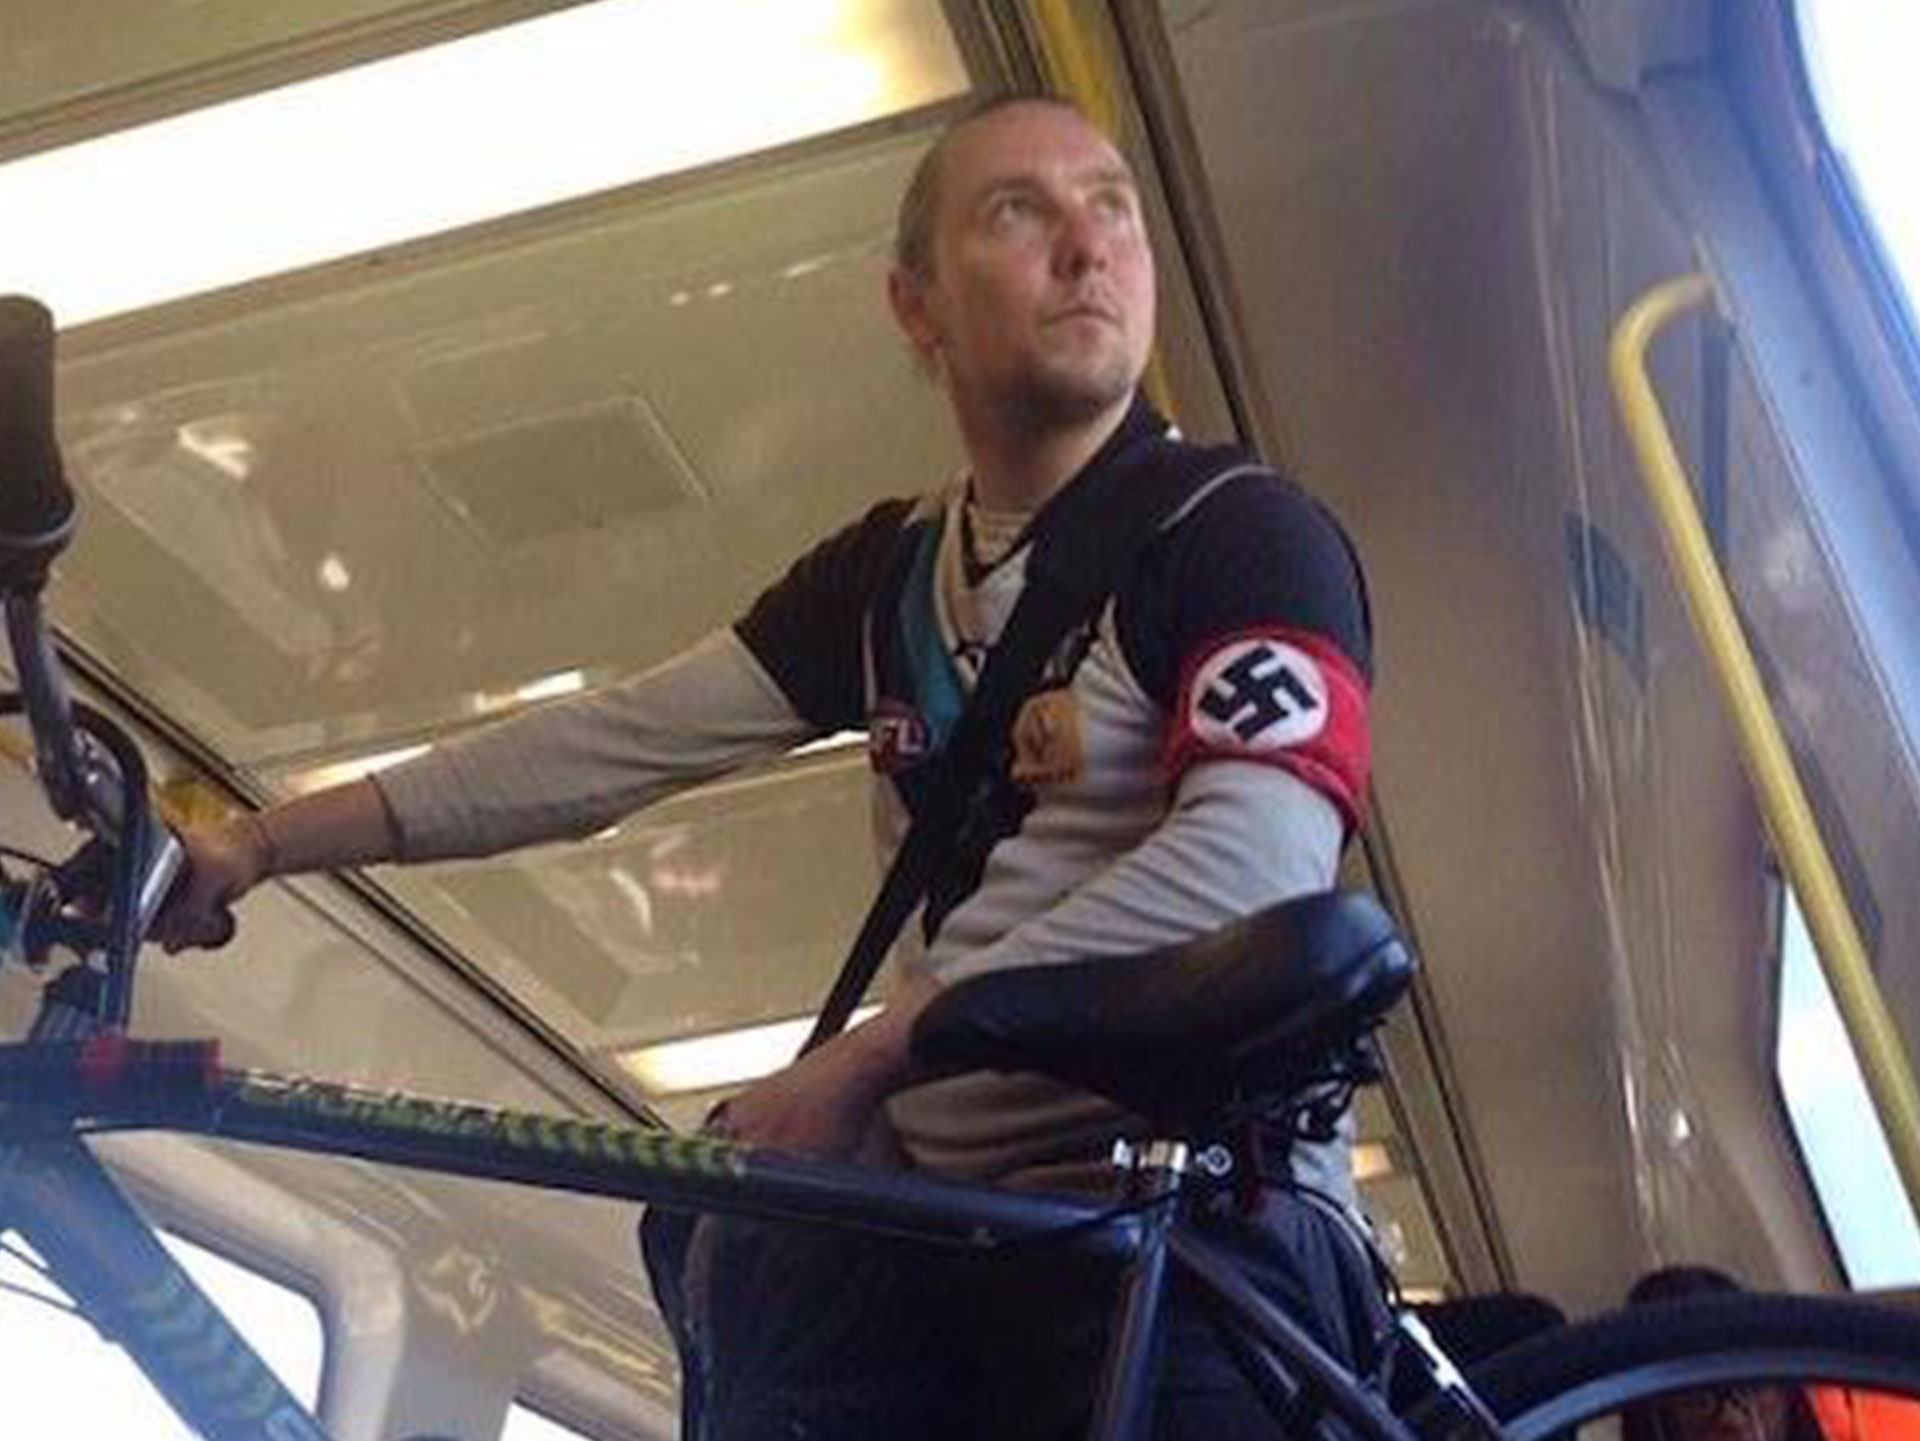 Real-life person wearing Nazi swastika outside of 1940s Germany